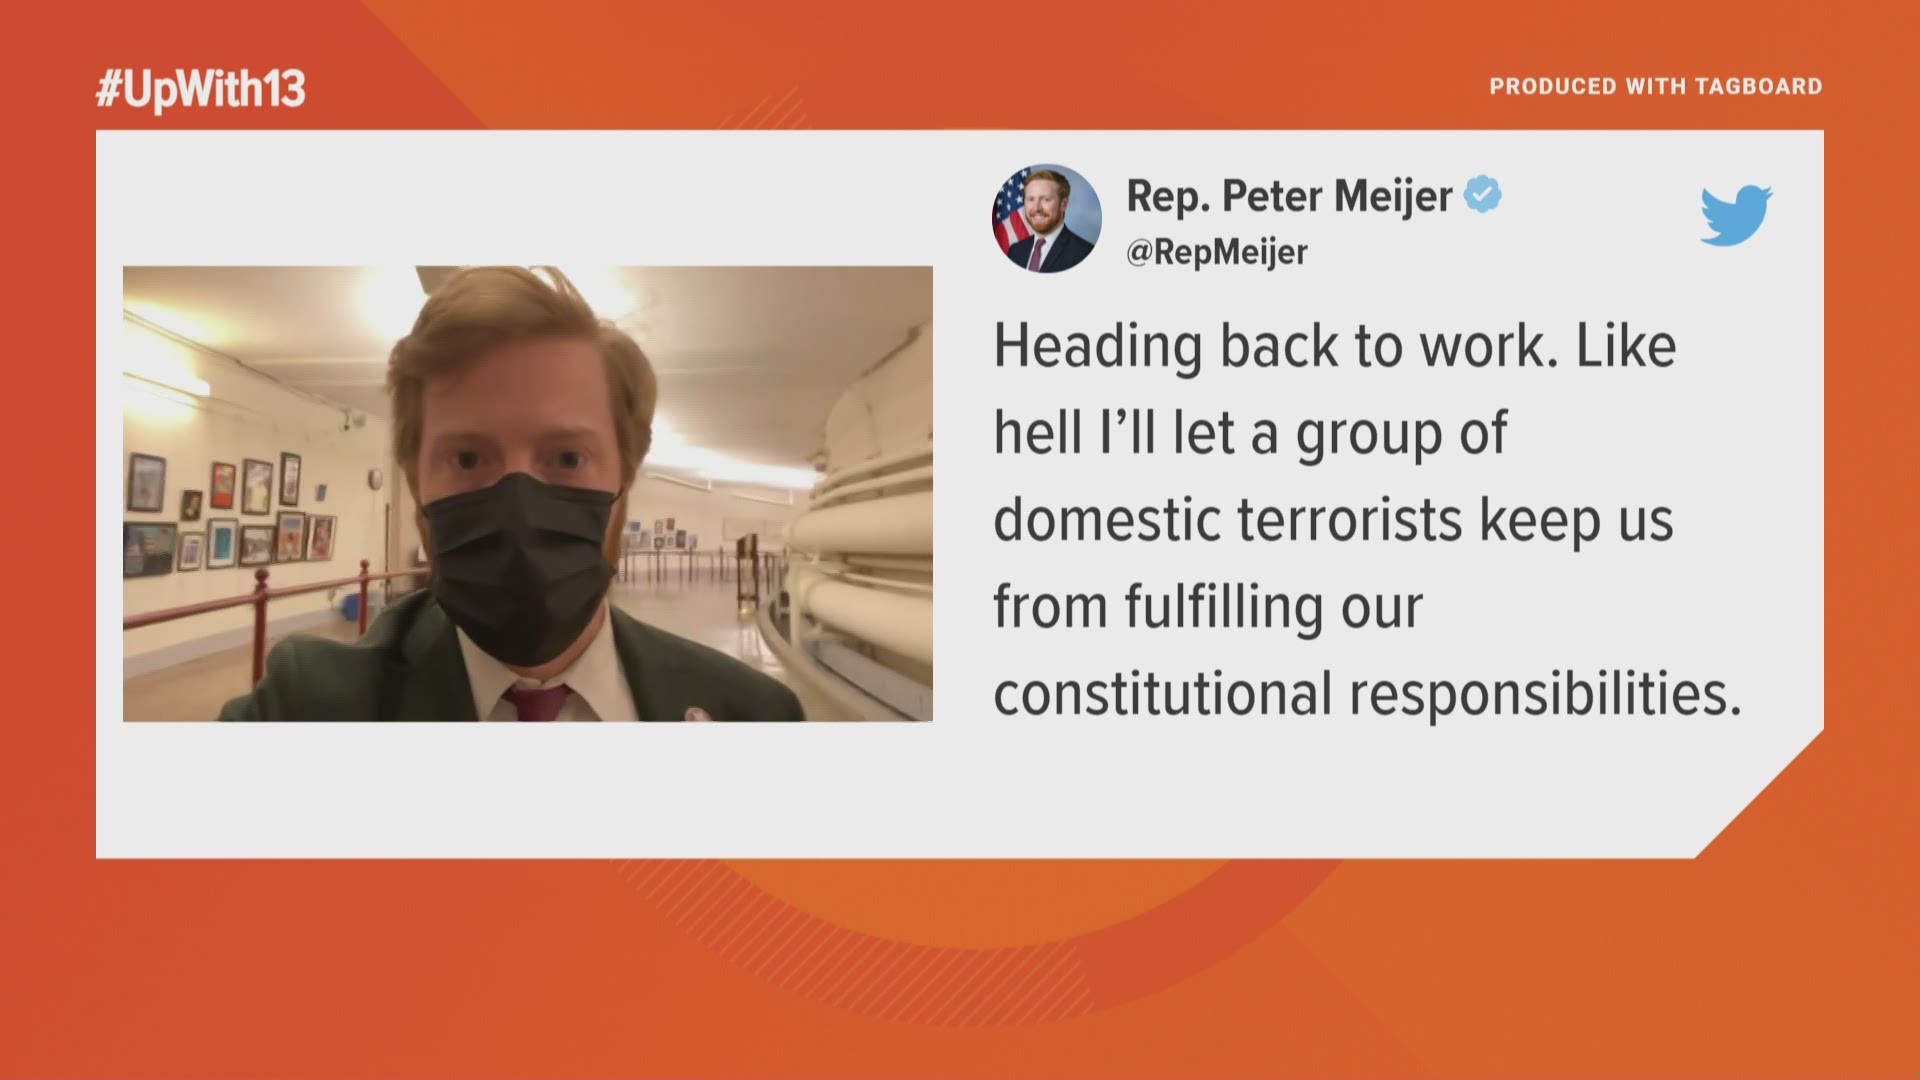 Michigan lawmakers, including Gov. Gretchen Whitmer and Rep. Peter Meijer shared their reactions to the US Capitol breach Wednesday.